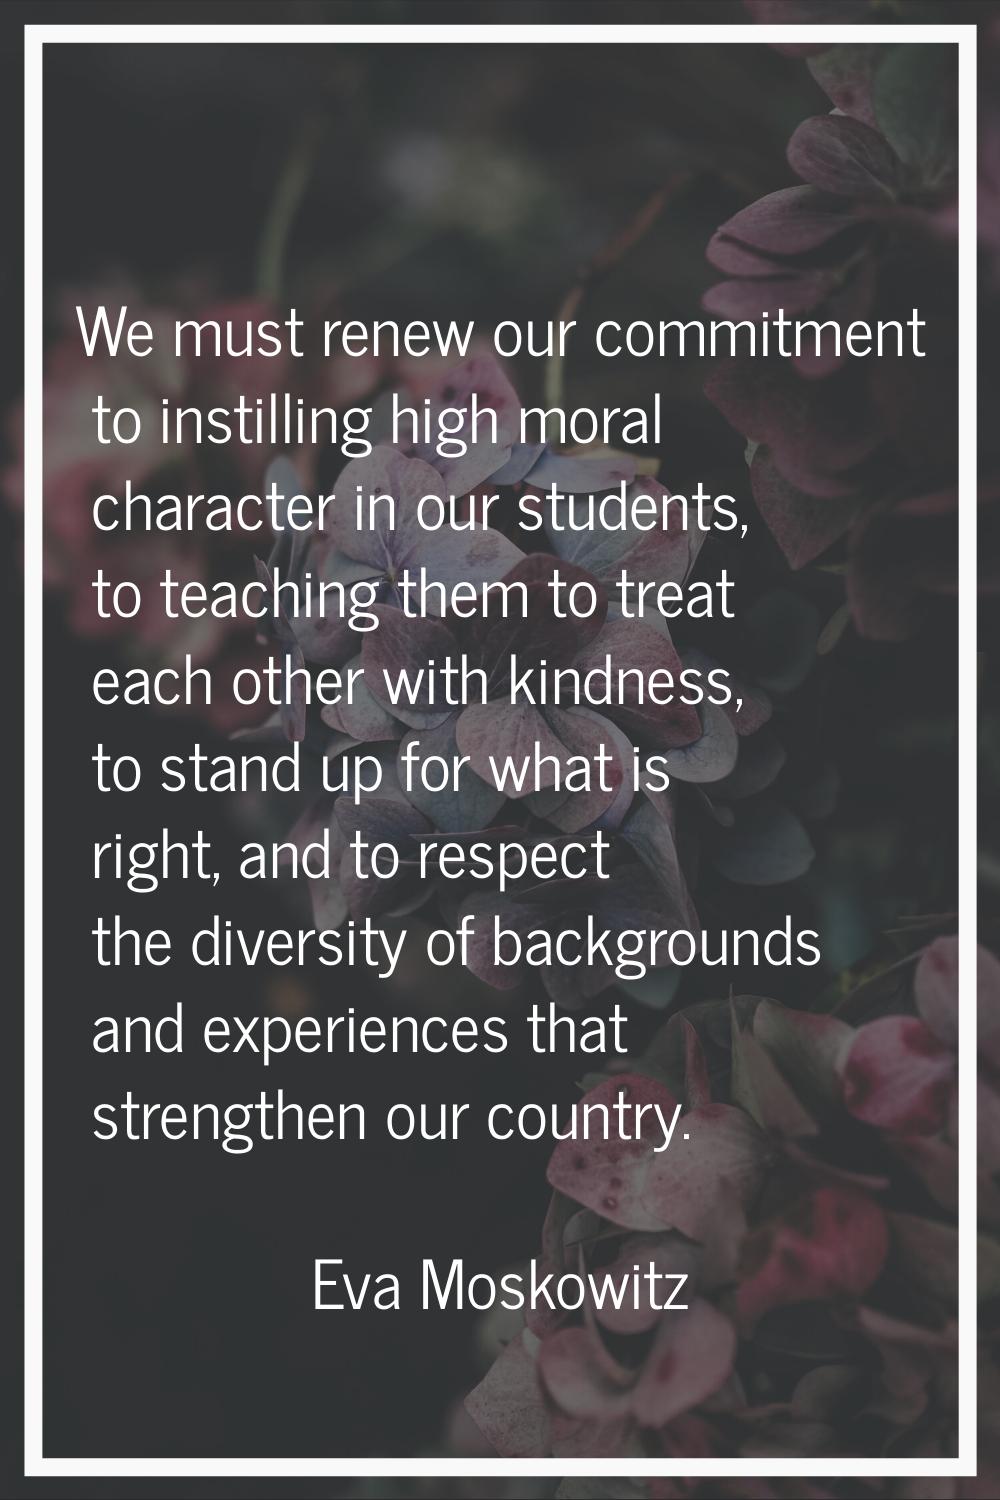 We must renew our commitment to instilling high moral character in our students, to teaching them t